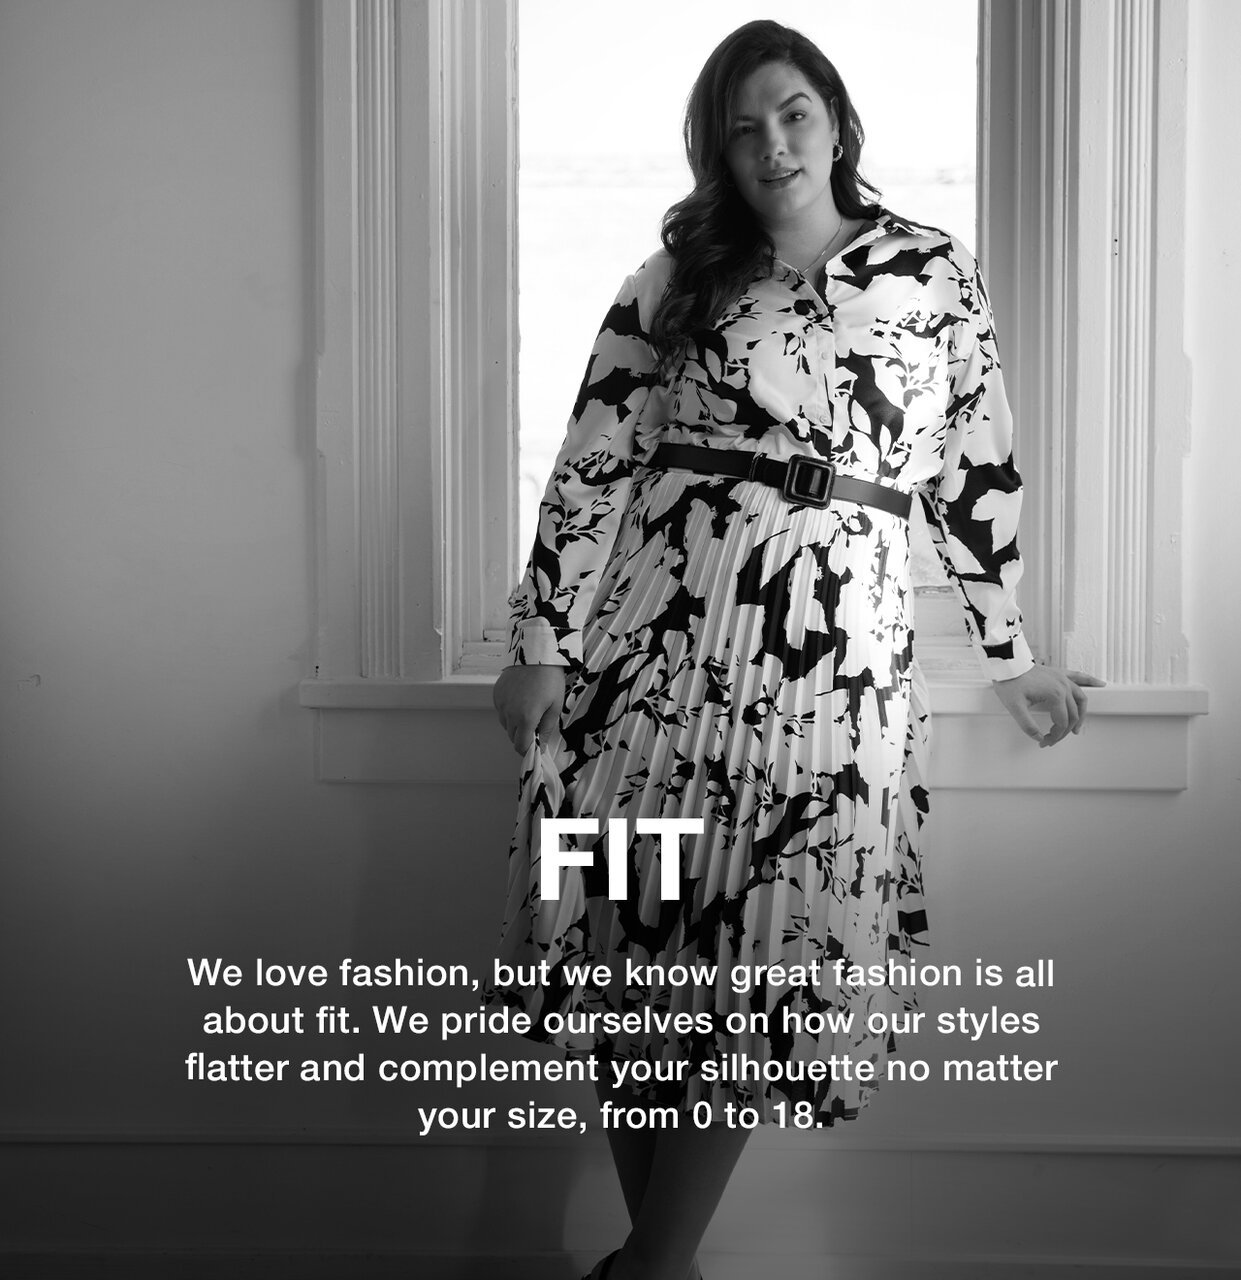 Fit - We love fashion, but we know great fashion is all about fit. We pride ourselves on how our styles flatter and complement your silhouette no matter your size, from 0 to 18